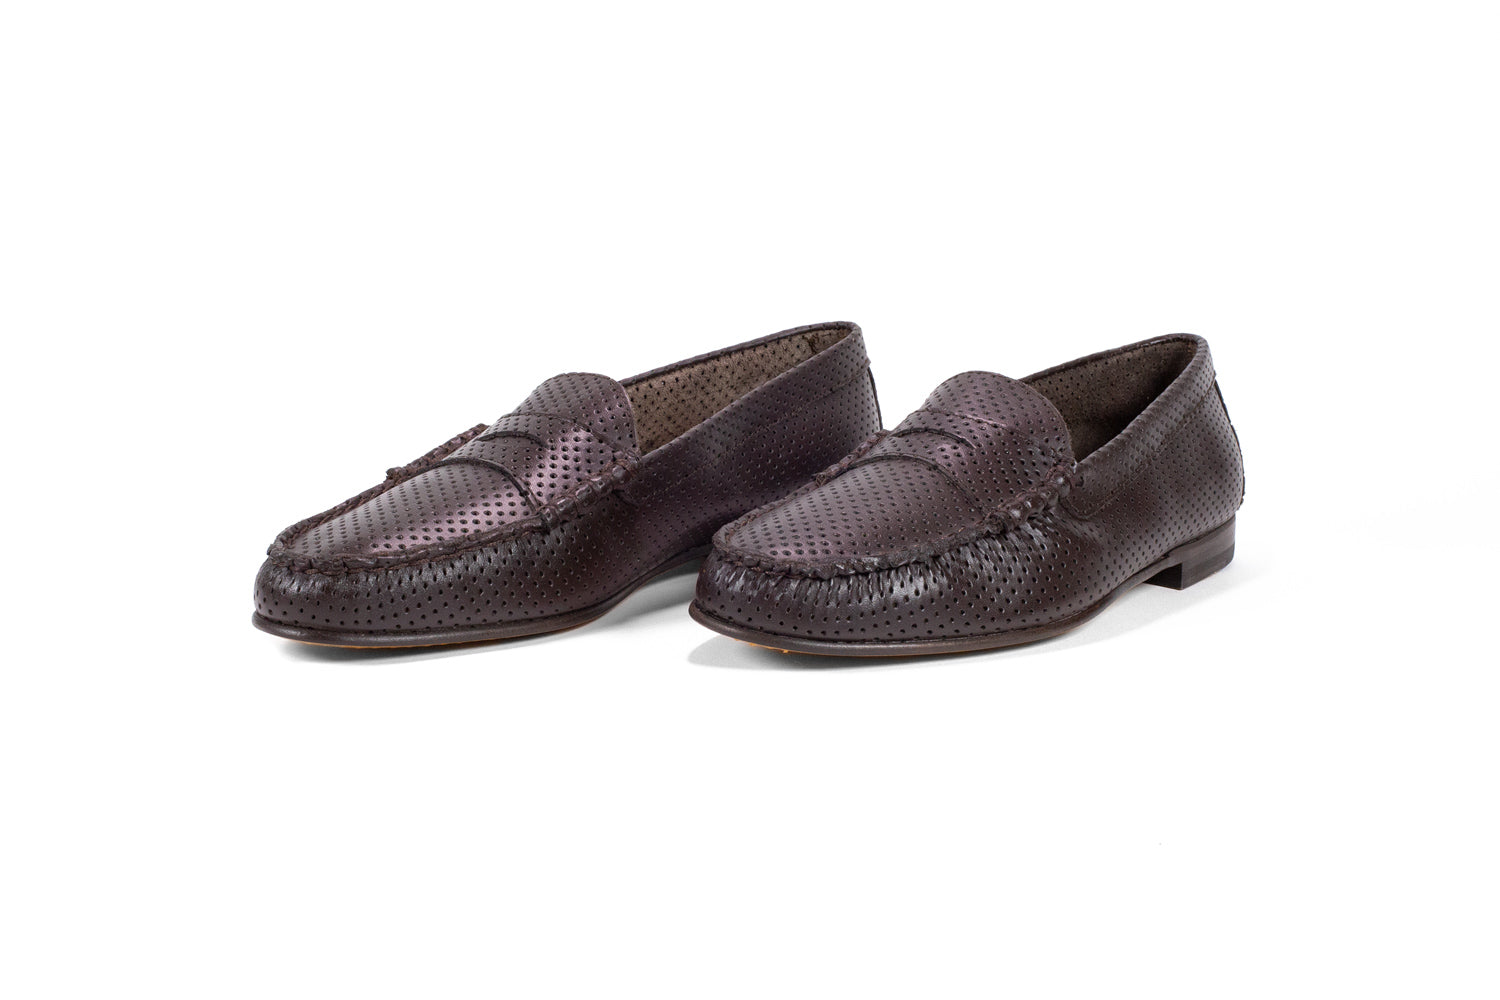 Louis Vuitton Major Loafer BROWN. Size 05.0